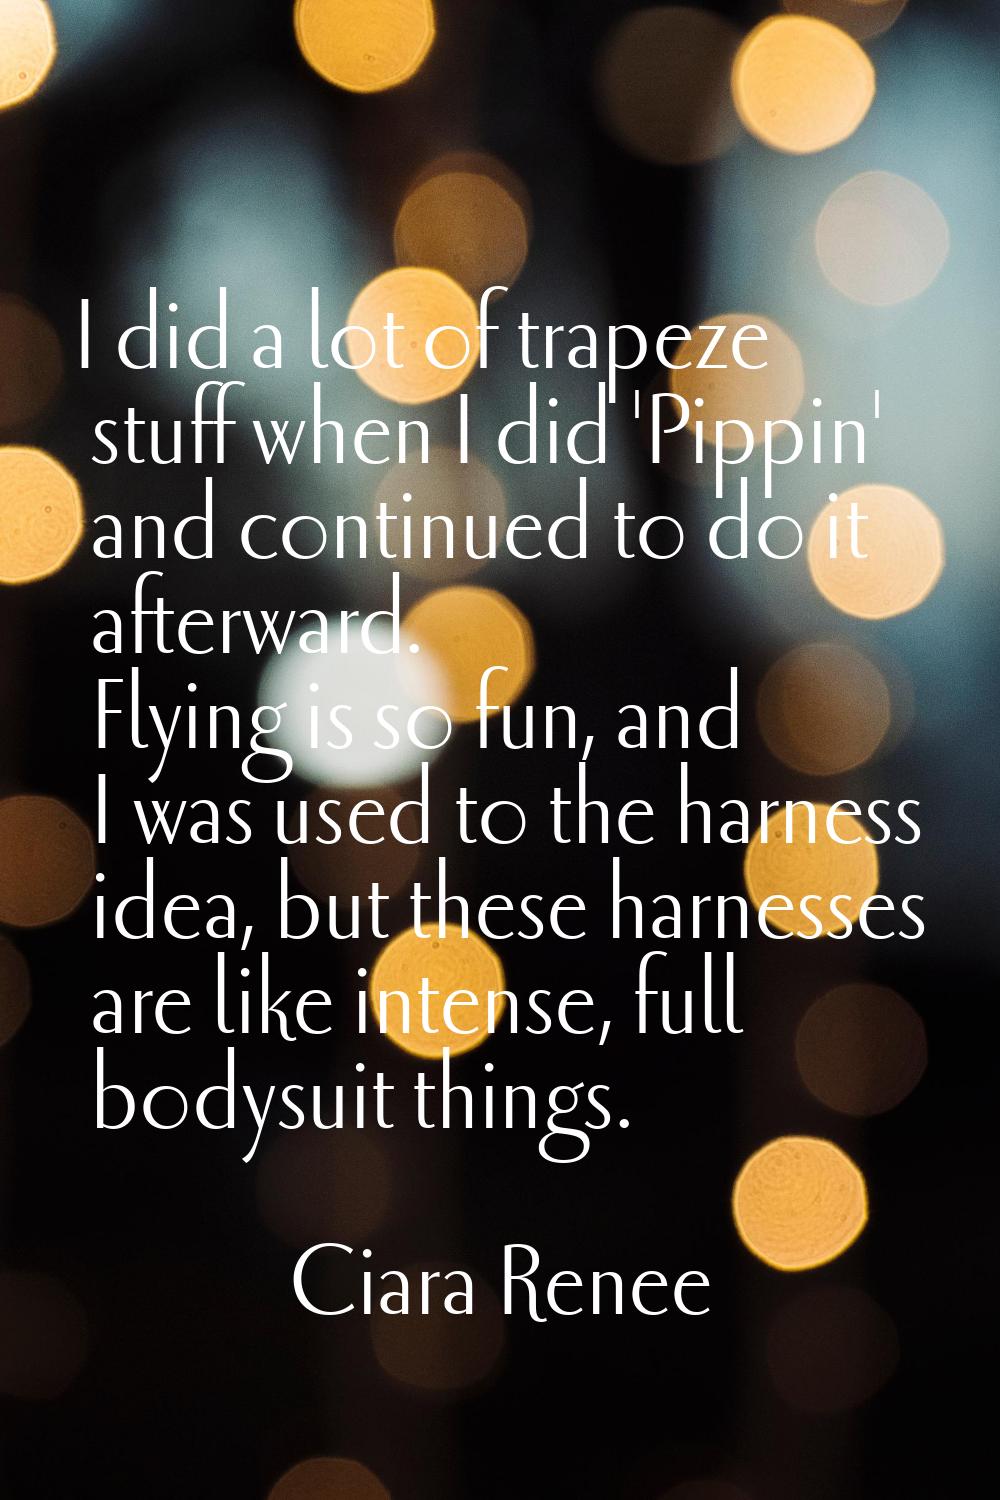 I did a lot of trapeze stuff when I did 'Pippin' and continued to do it afterward. Flying is so fun